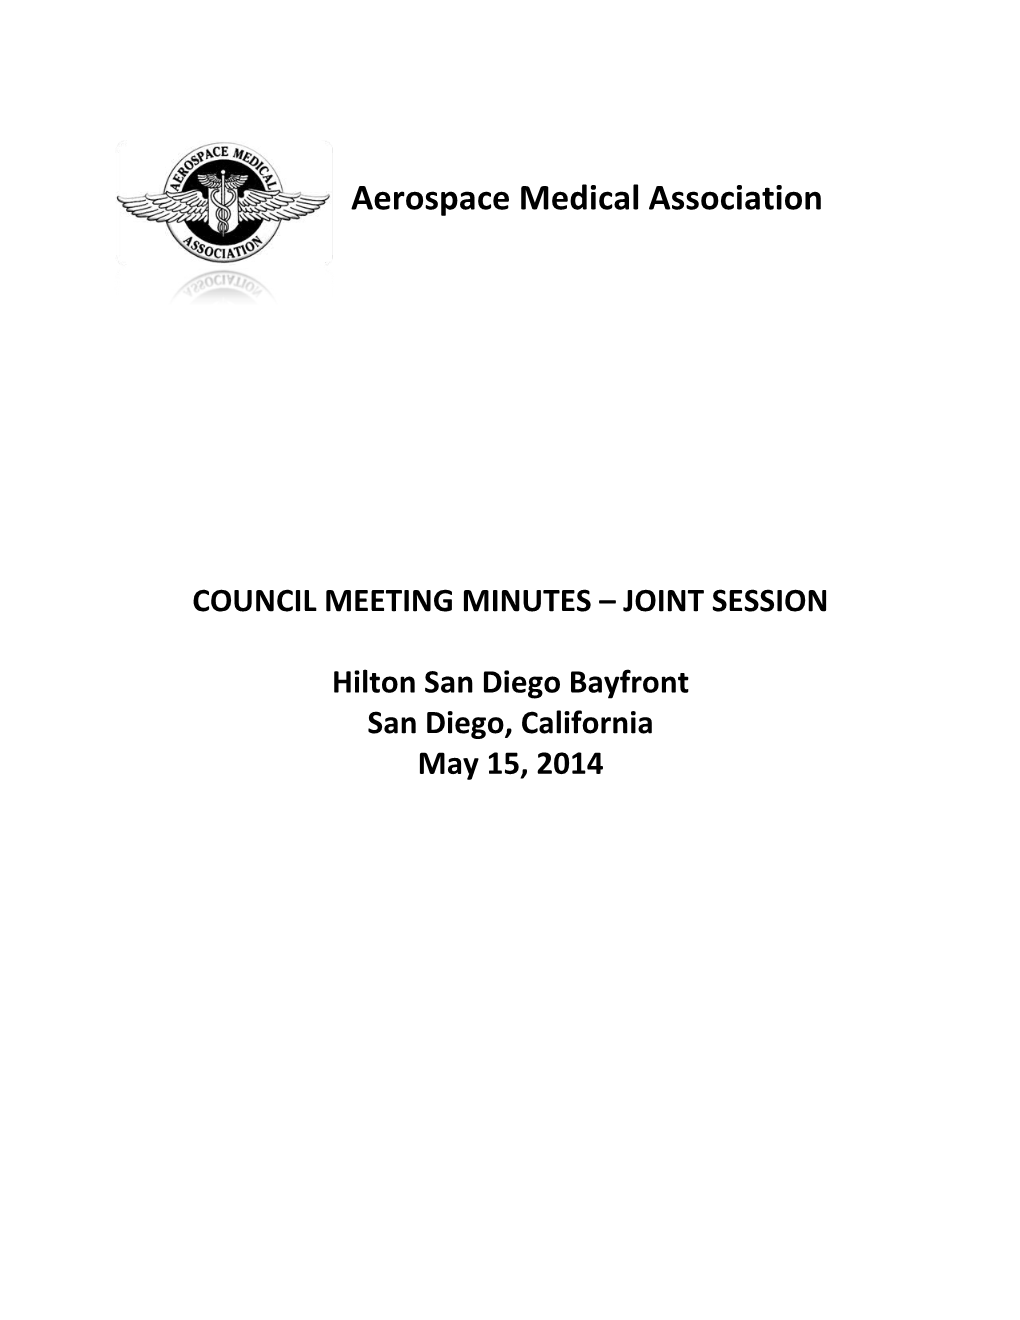 Council Meeting Minutes JOINT SESSION